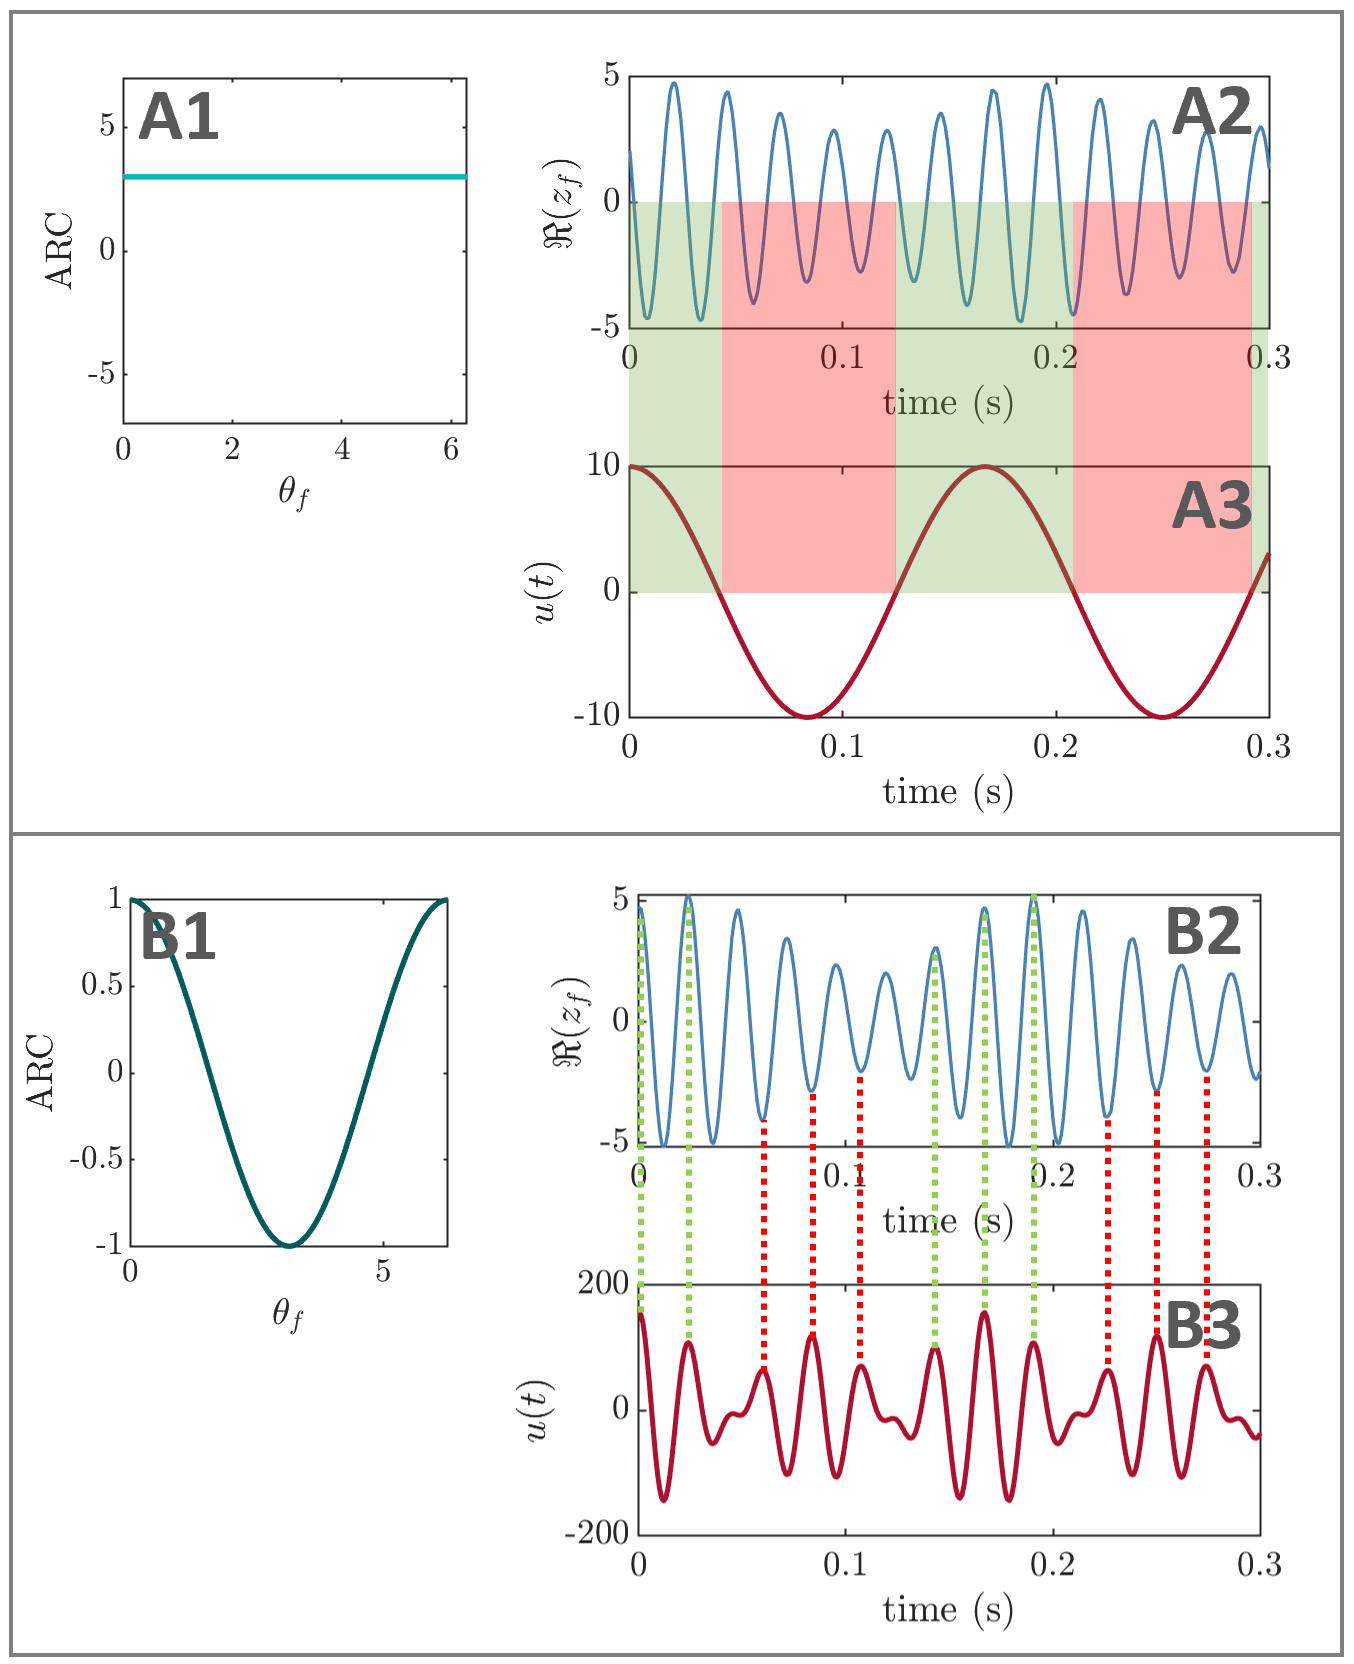 Optimal stimulation waveforms are shown in red, and the effect on neural activity in blue. The top panel shows how the slow waveform should align with neural activity, and the bottom panel shows how the fast waveform should align with the neural activity. 